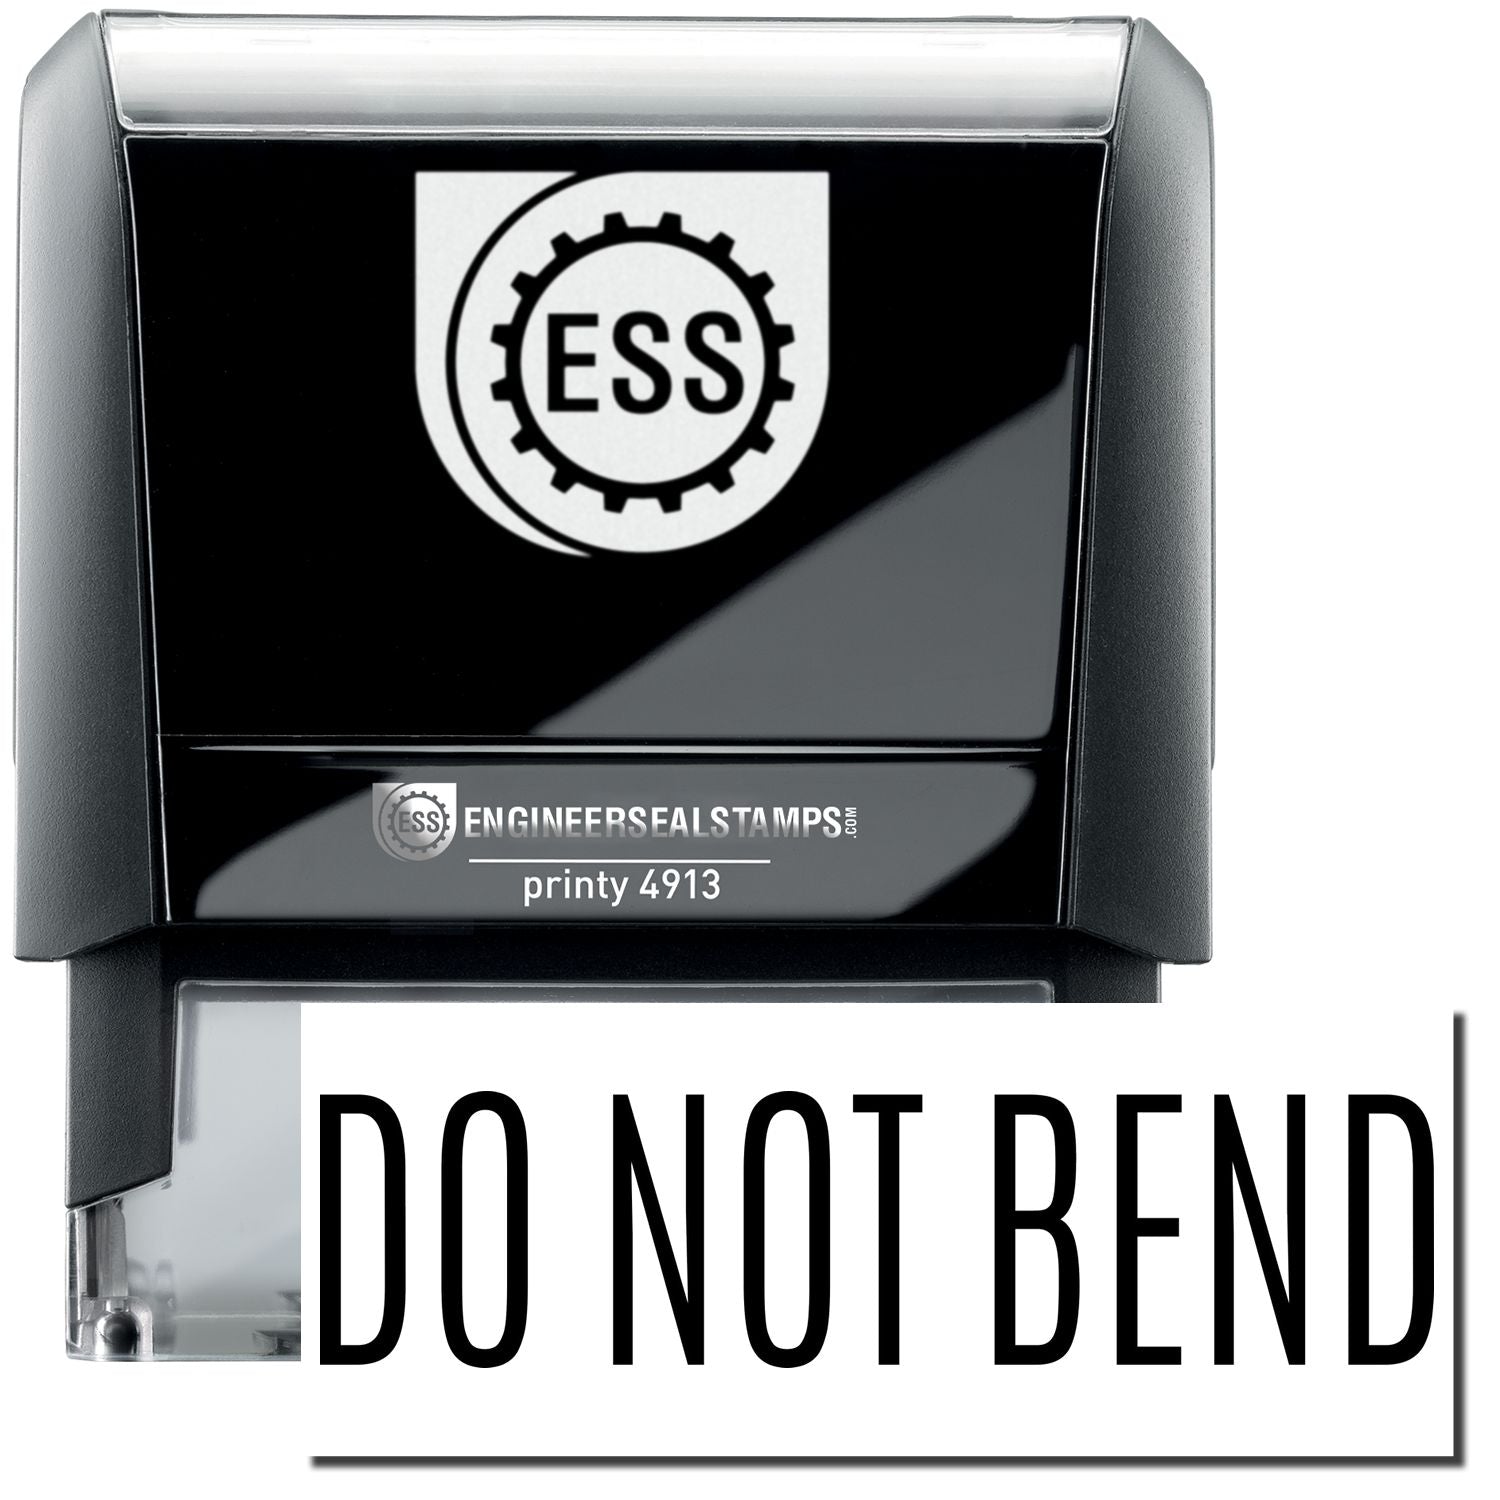 A self-inking stamp with a stamped image showing how the text "DO NOT BEND" in a large font is displayed by it after stamping.